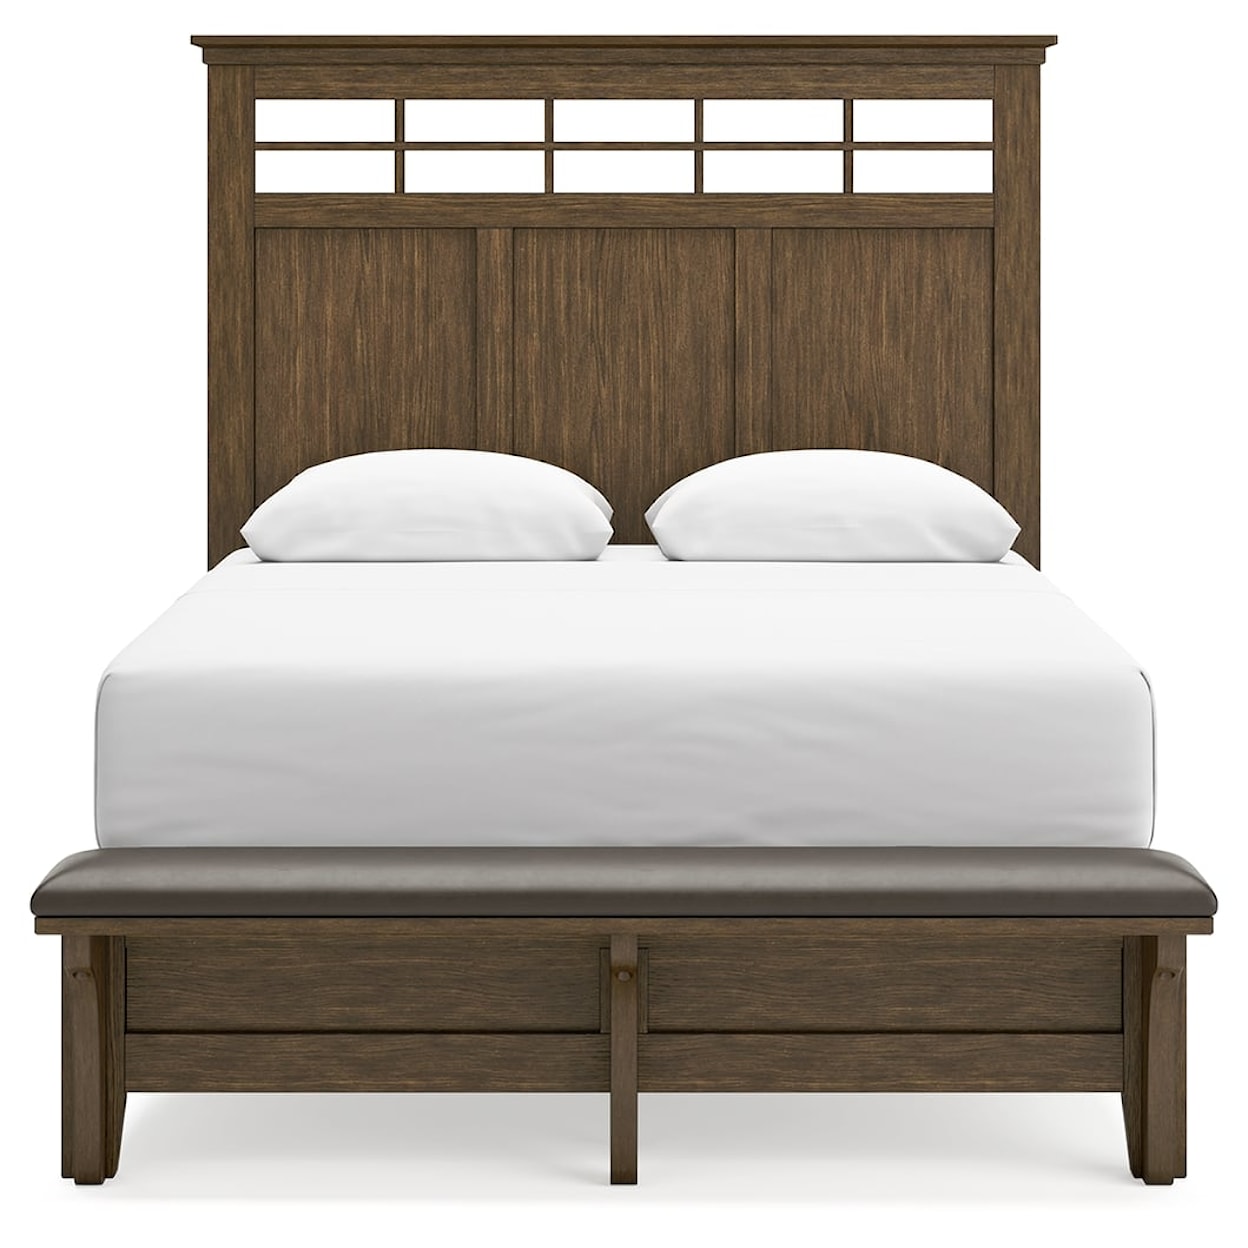 Ashley Furniture Benchcraft Shawbeck Queen Panel Bed